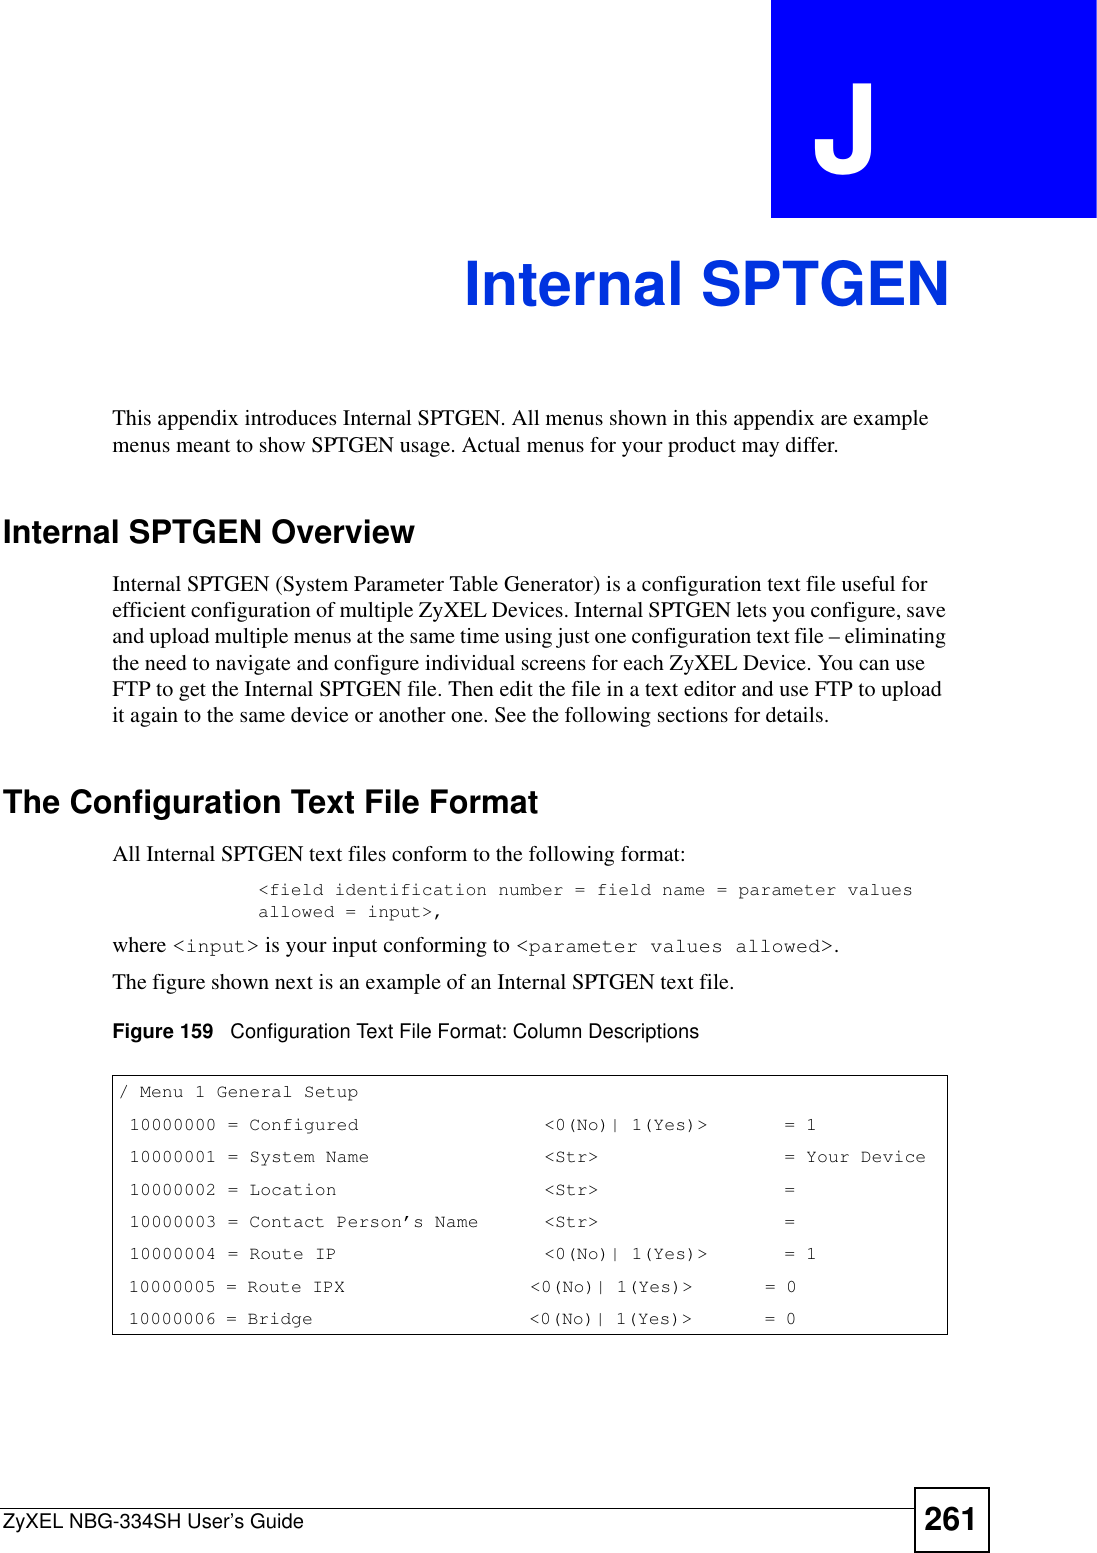 ZyXEL NBG-334SH User’s Guide 261APPENDIX  J Internal SPTGENThis appendix introduces Internal SPTGEN. All menus shown in this appendix are example menus meant to show SPTGEN usage. Actual menus for your product may differ.Internal SPTGEN OverviewInternal SPTGEN (System Parameter Table Generator) is a configuration text file useful for efficient configuration of multiple ZyXEL Devices. Internal SPTGEN lets you configure, save and upload multiple menus at the same time using just one configuration text file – eliminating the need to navigate and configure individual screens for each ZyXEL Device. You can use FTP to get the Internal SPTGEN file. Then edit the file in a text editor and use FTP to upload it again to the same device or another one. See the following sections for details. The Configuration Text File FormatAll Internal SPTGEN text files conform to the following format:&lt;field identification number = field name = parameter values allowed = input&gt;,where &lt;input&gt; is your input conforming to &lt;parameter values allowed&gt;.The figure shown next is an example of an Internal SPTGEN text file.Figure 159   Configuration Text File Format: Column Descriptions/ Menu 1 General Setup     10000000 = Configured                 &lt;0(No)| 1(Yes)&gt;       = 1     10000001 = System Name                &lt;Str&gt;                 = Your Device 10000002 = Location                   &lt;Str&gt;                 =      10000003 = Contact Person’s Name      &lt;Str&gt;                 =      10000004 = Route IP                   &lt;0(No)| 1(Yes)&gt;       = 1     10000005 = Route IPX                  &lt;0(No)| 1(Yes)&gt;       = 0               10000006 = Bridge                     &lt;0(No)| 1(Yes)&gt;       = 0              